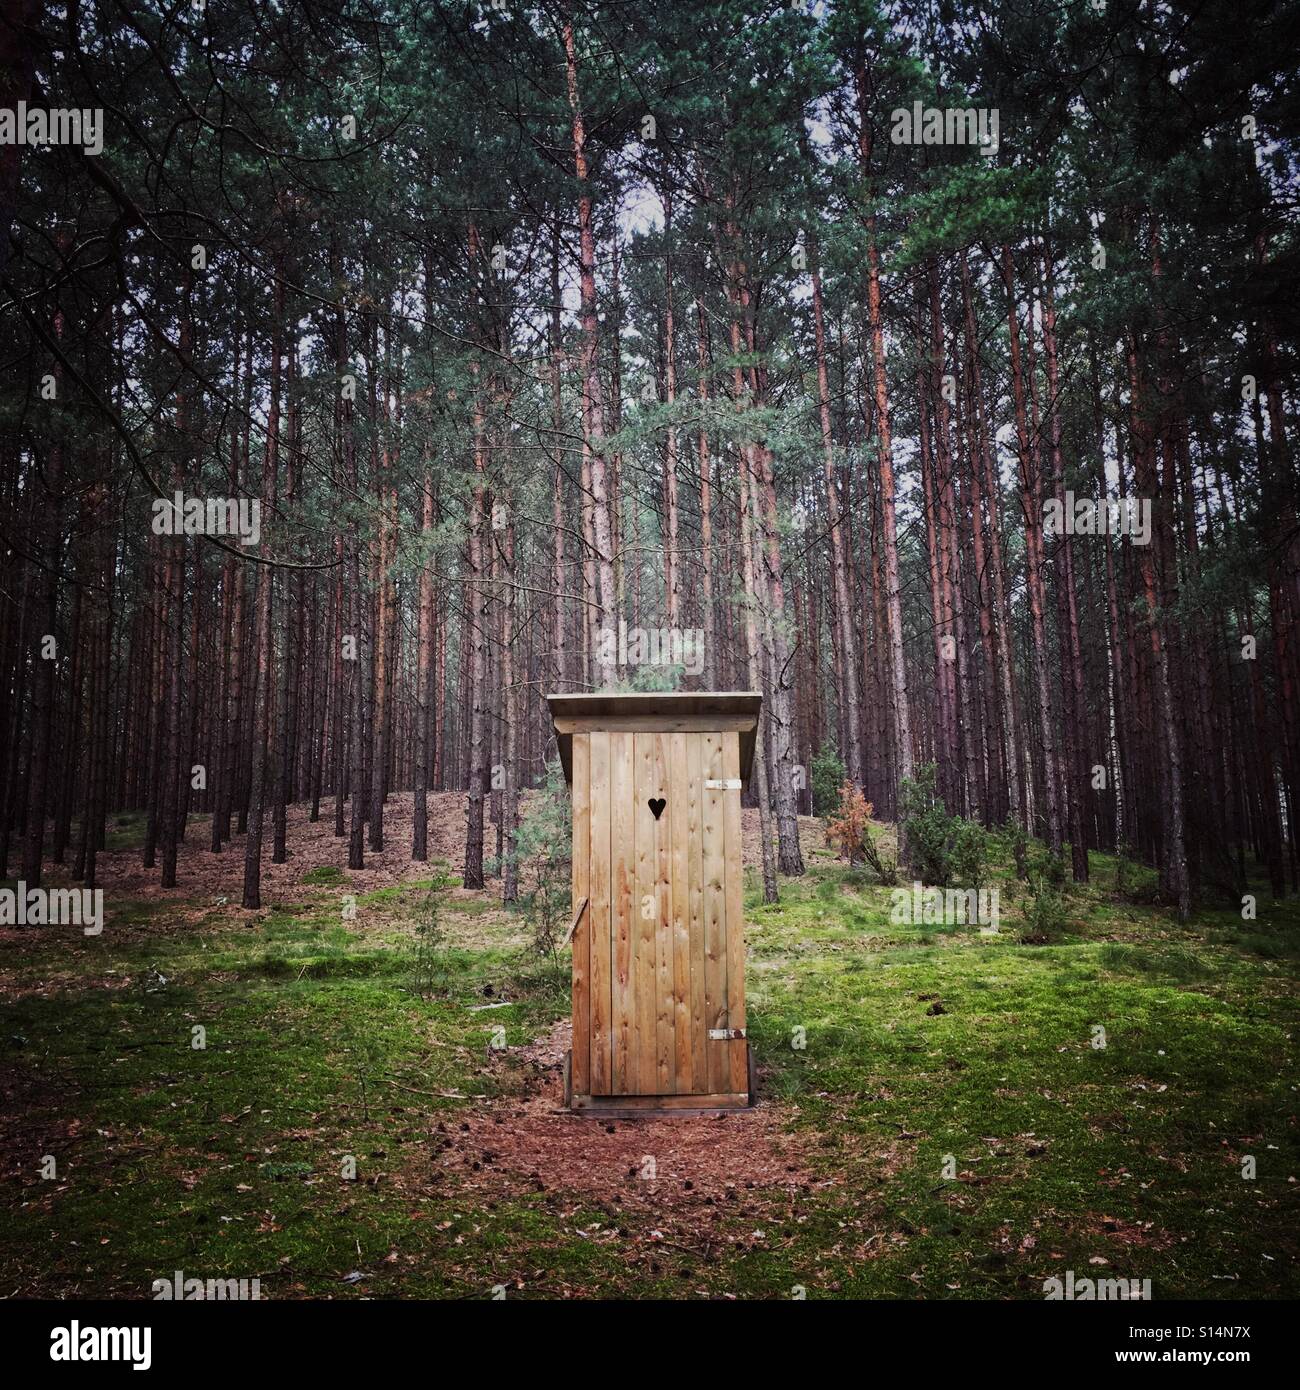 Wooden privy in forest, Poland Stock Photo